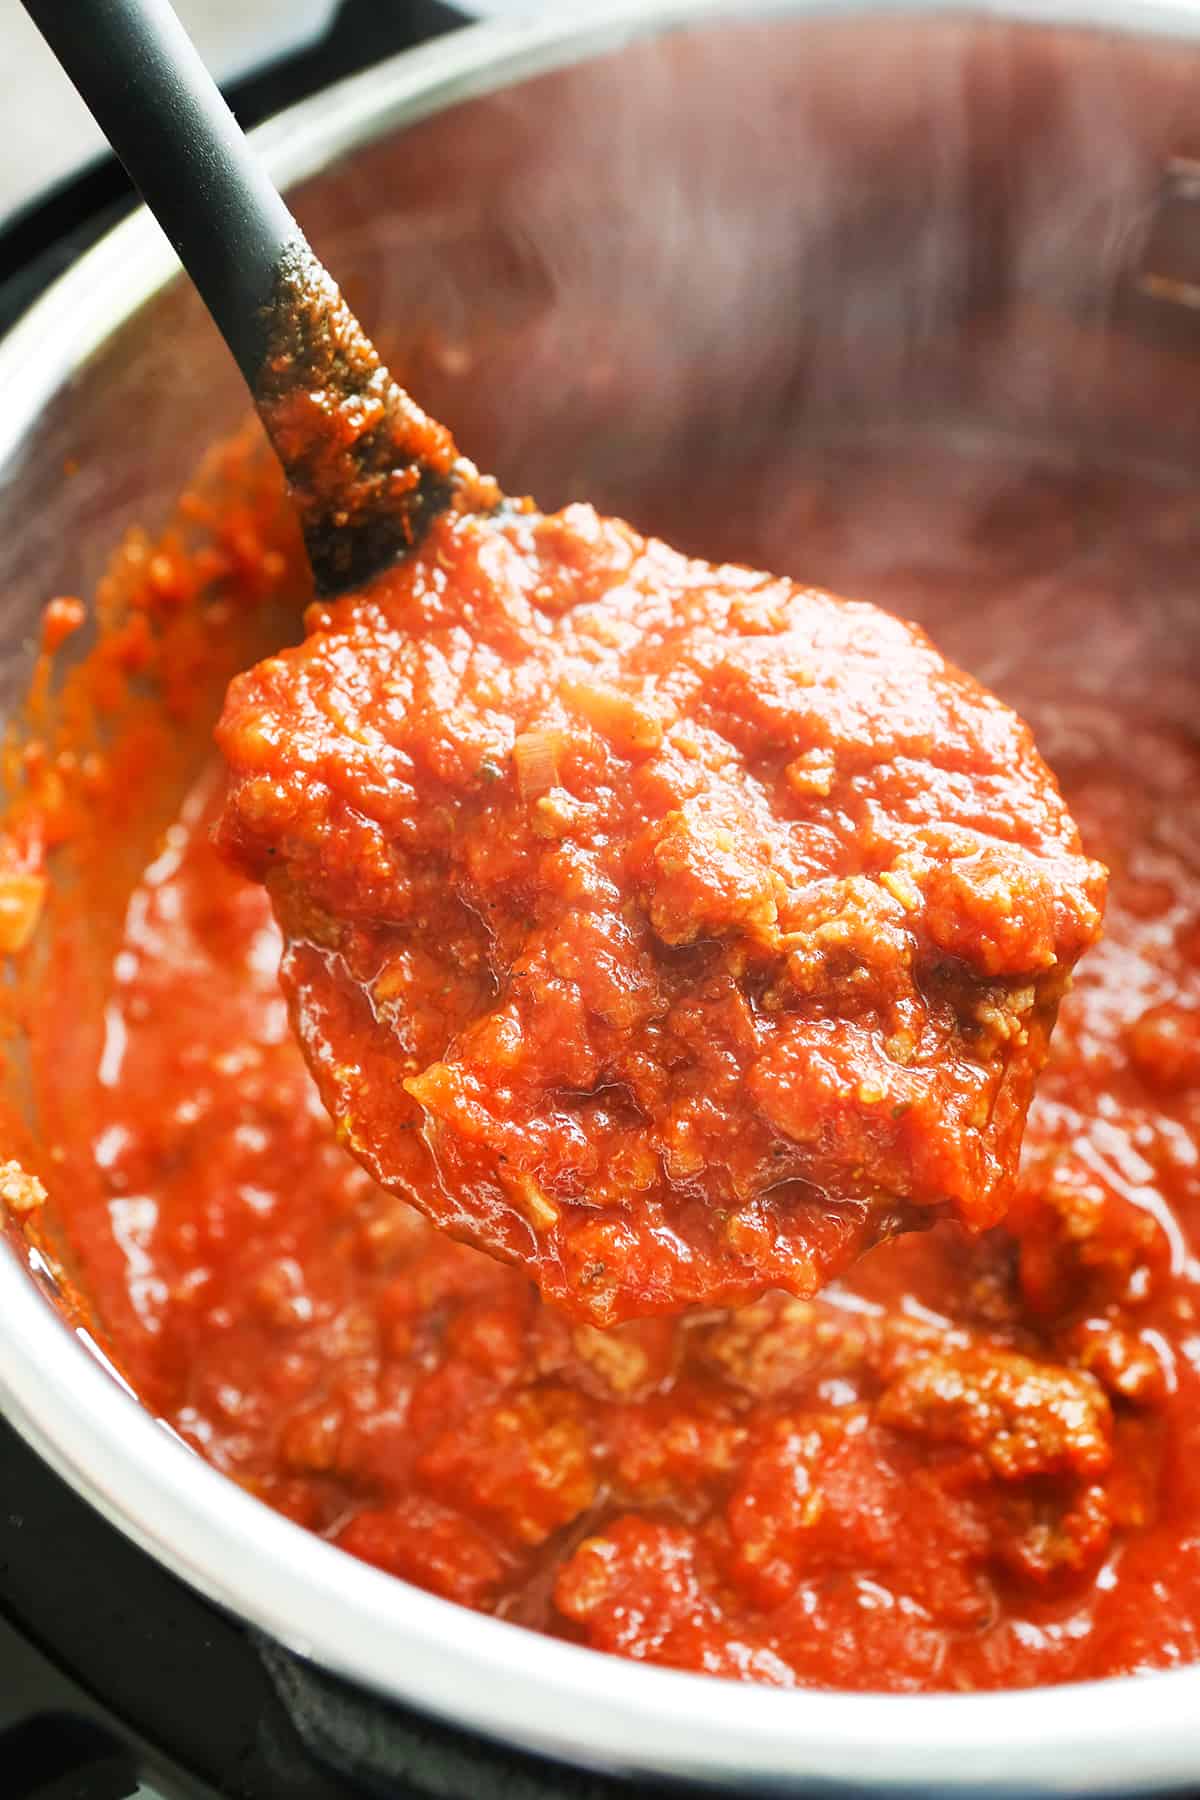 Ladle filled with a thick and chunky spaghetti sauce.